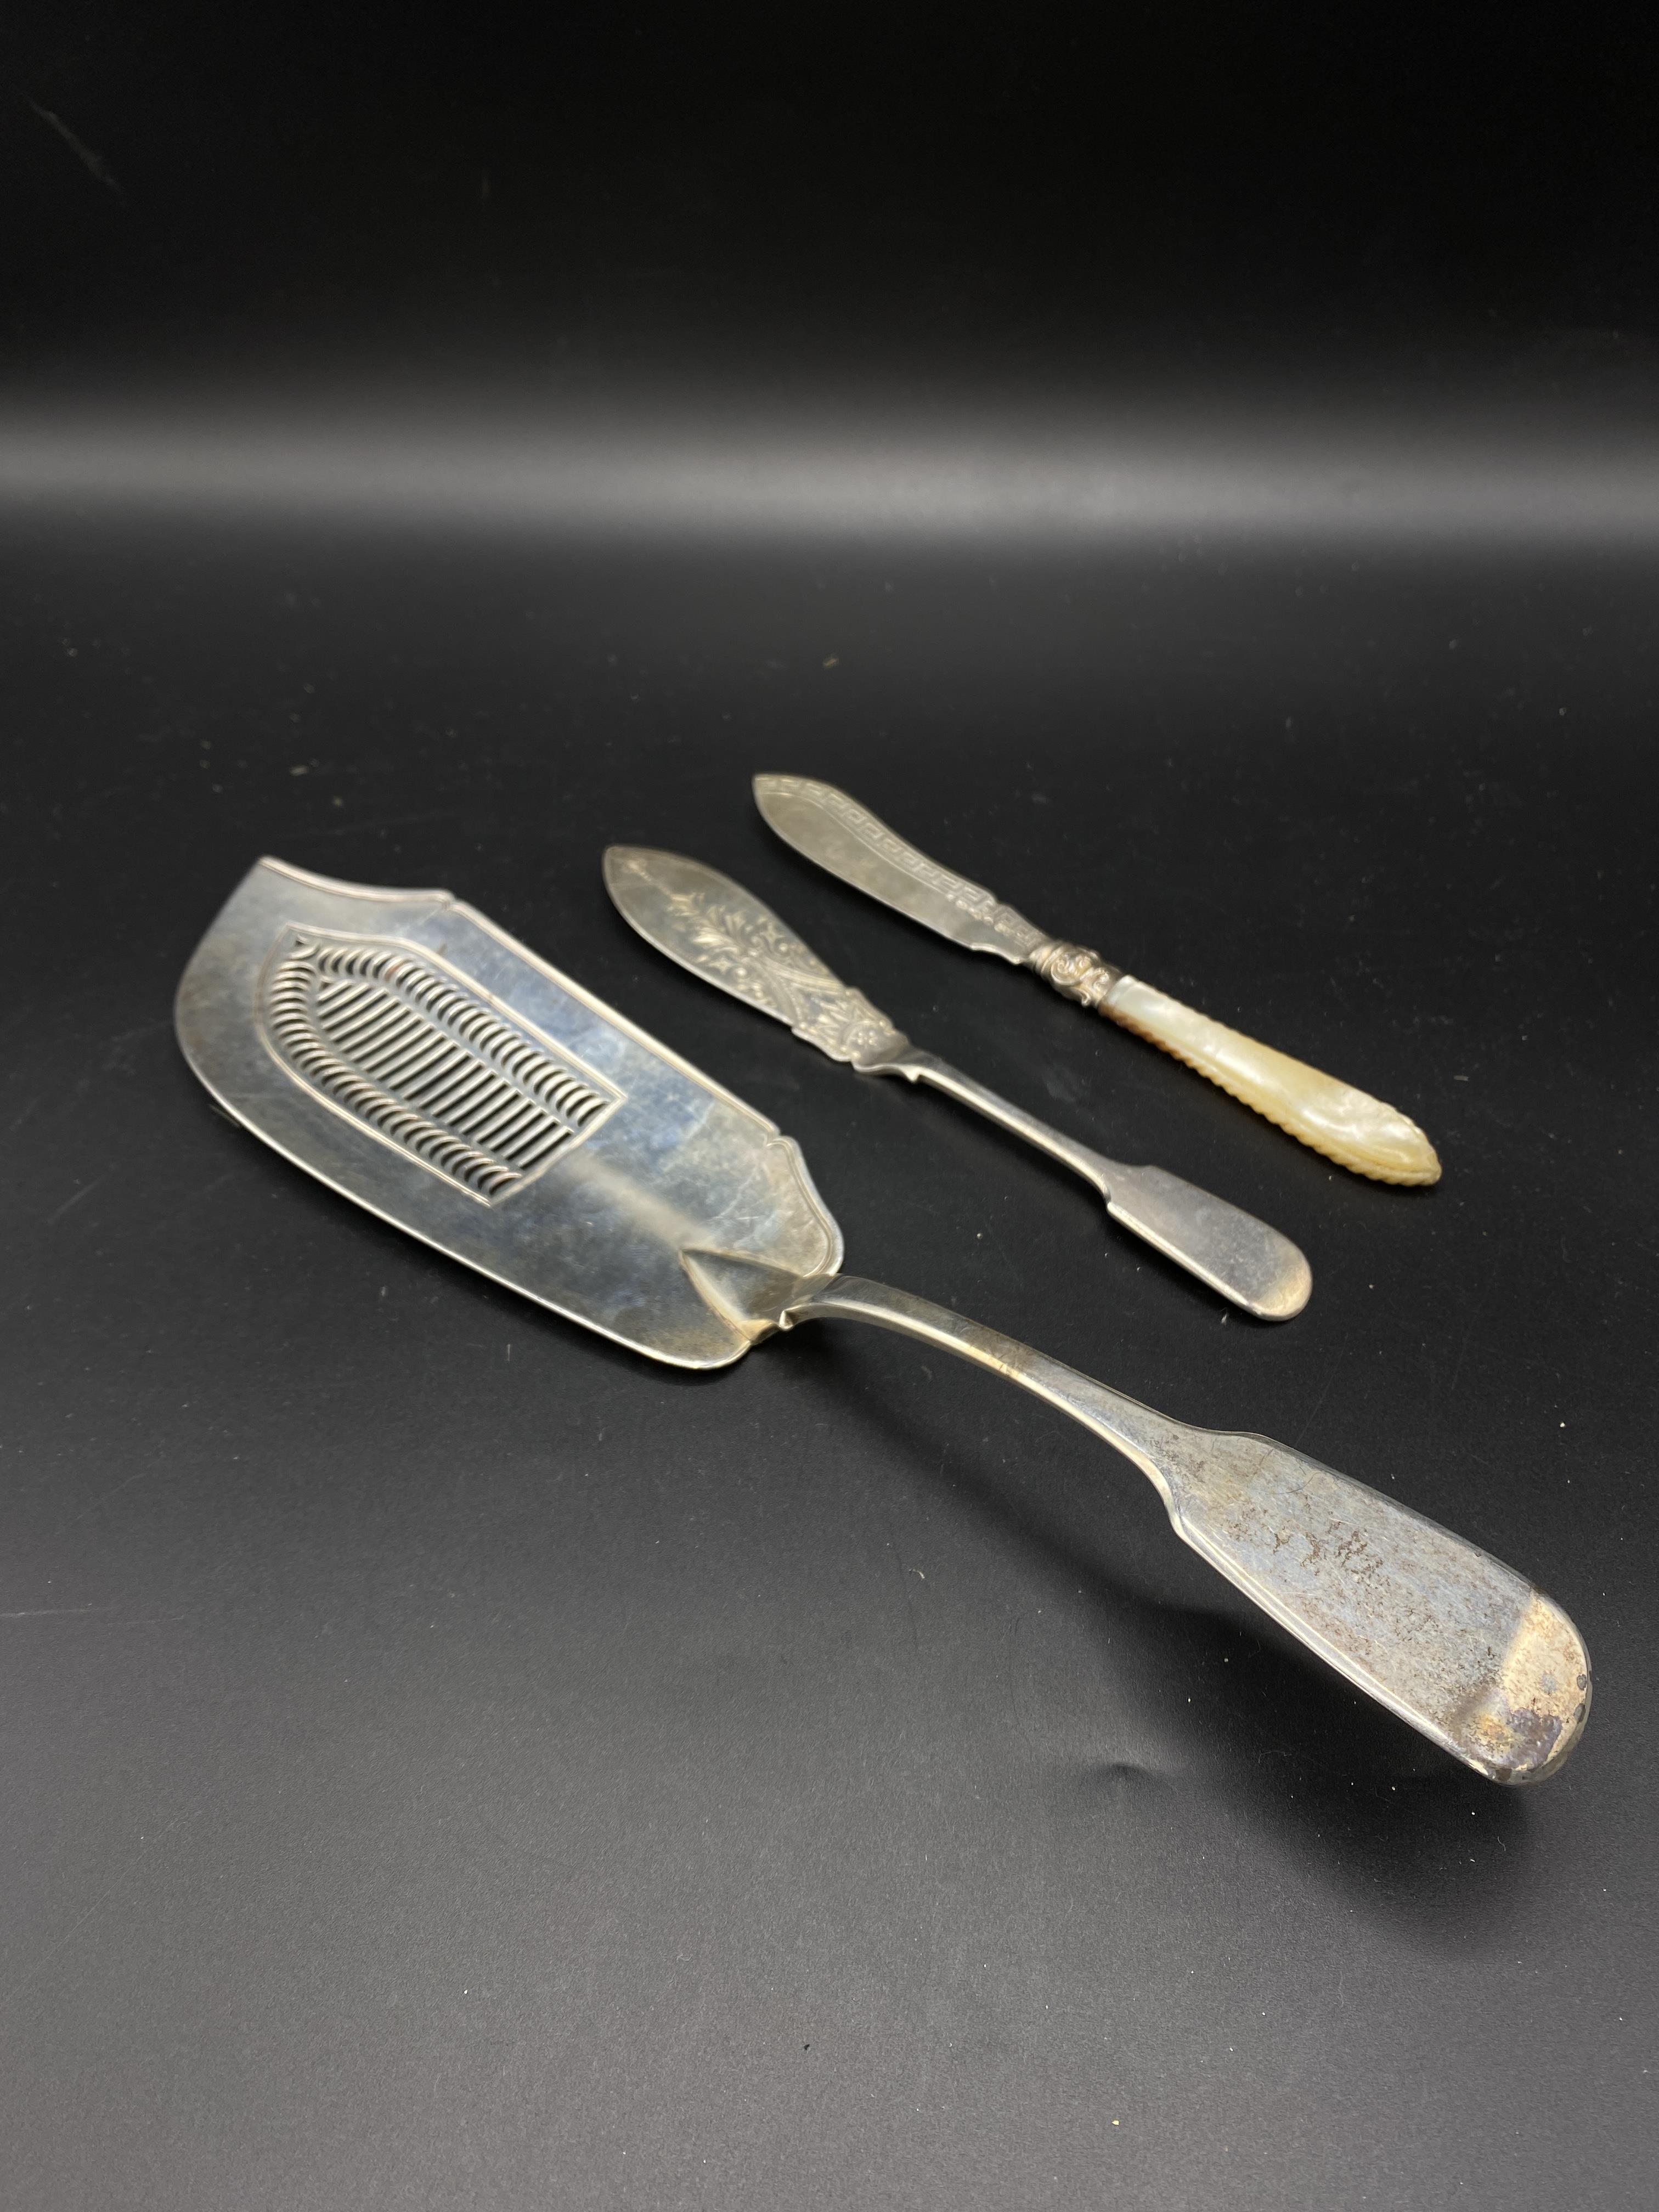 Silver fish slice and server together with a knife with mother of pearl handle